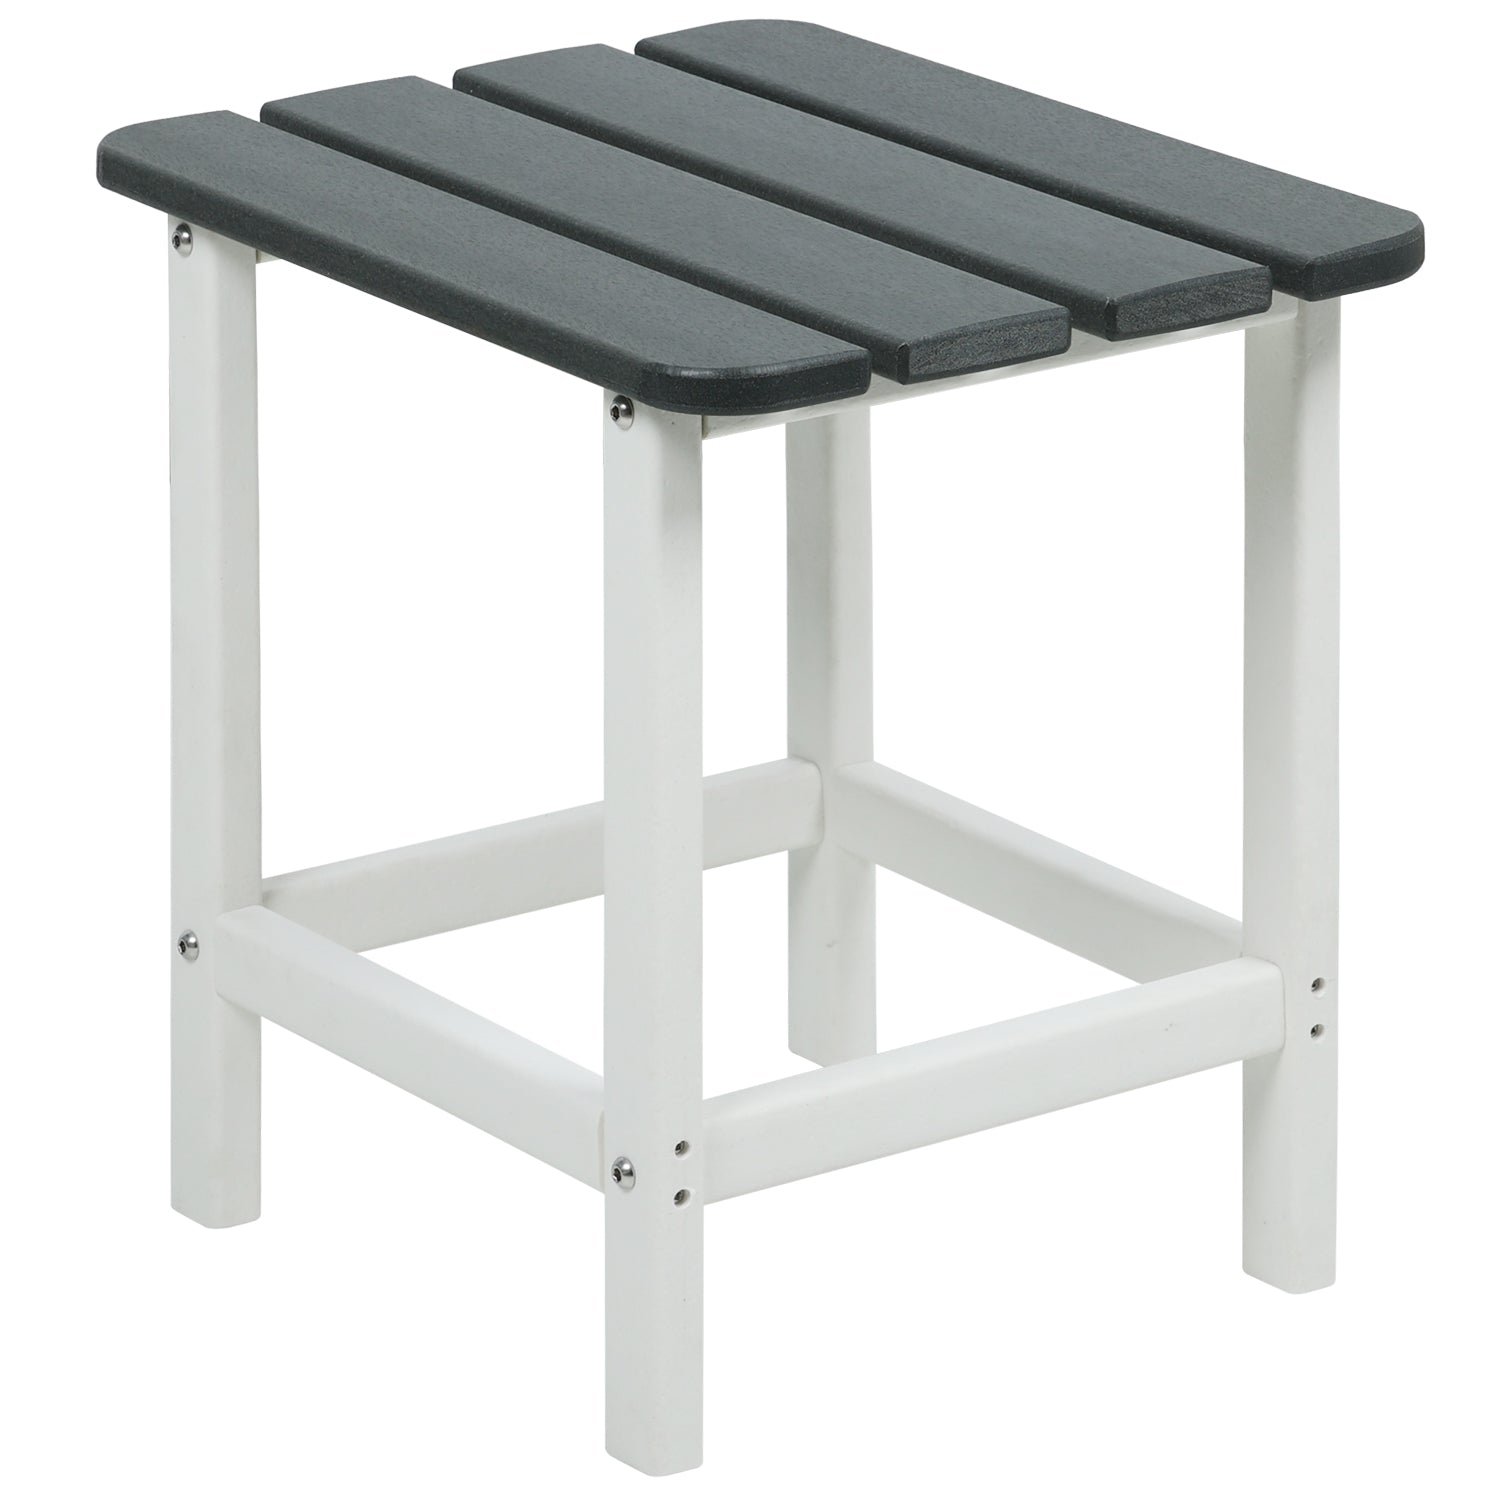 Outdoor Side Table, Square Adirondack Patio End Table for Patio, Pool, Porch Furniture Aoodor Grey  